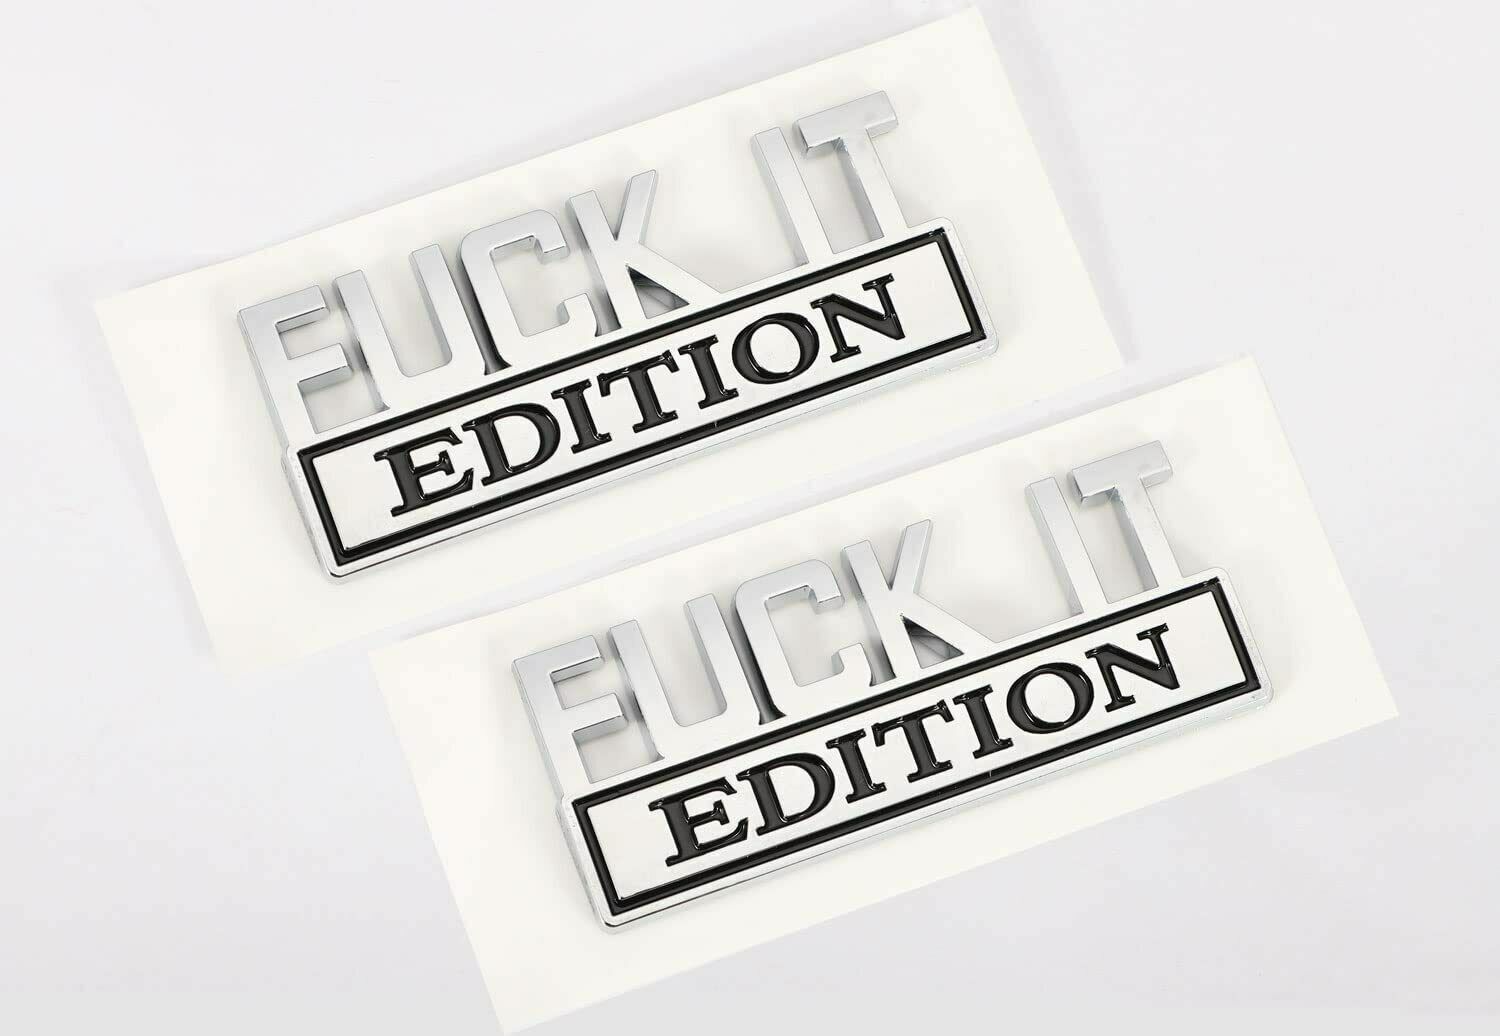 2pc Black FUCK-IT EDITION Emblem Badge Decal Sticker for Chevy Car Truck Fit All